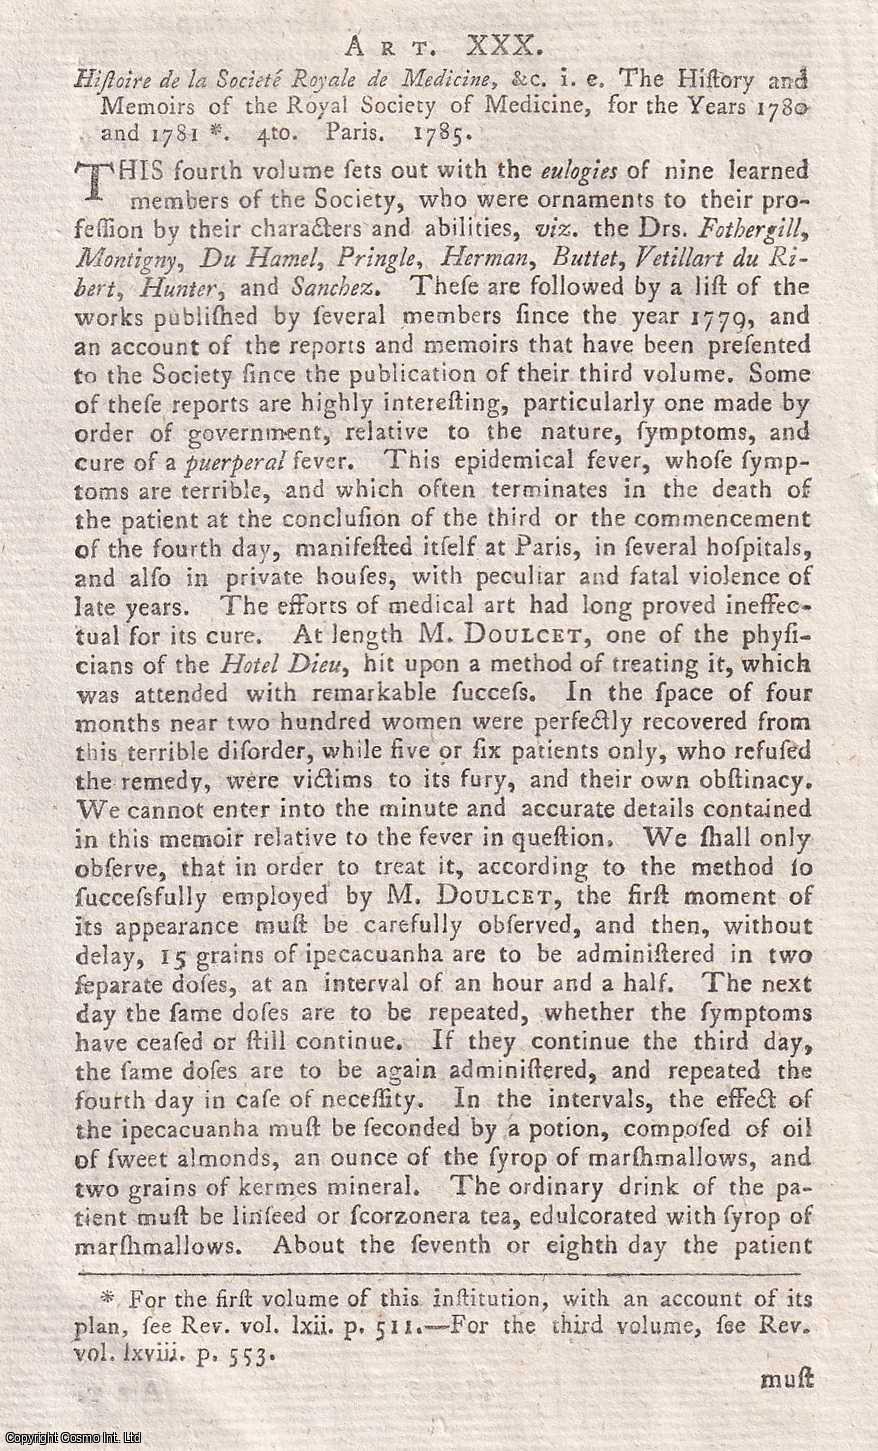 Author Not Stated - The History and Memoirs of the Royal Society of Medicine, for 1780 & 1781. An original essay from the Monthly Review, 1786. No author is given for this article.